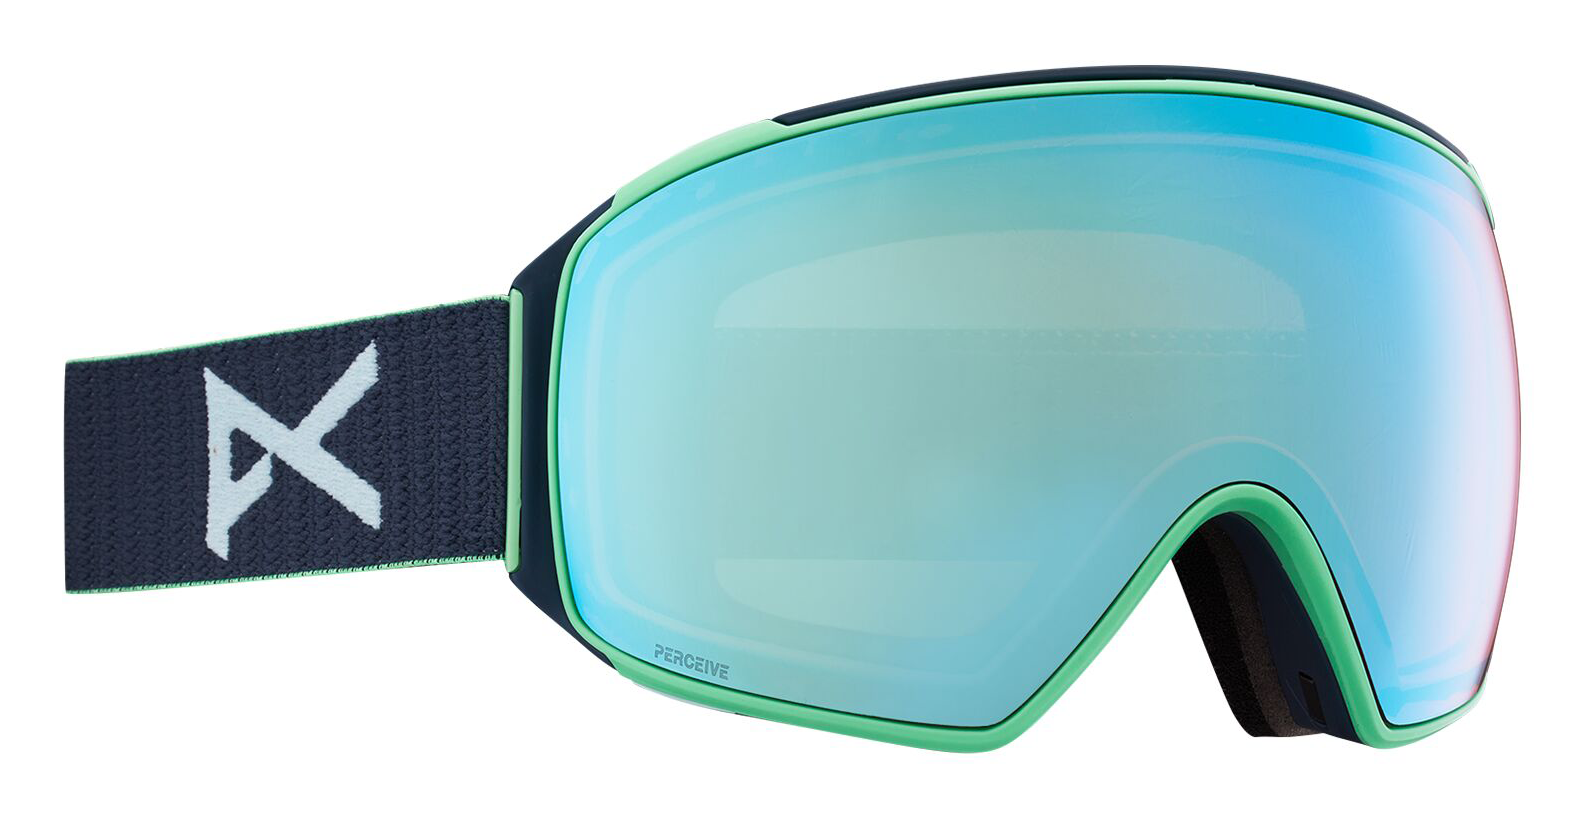 Best lens color for snow goggles featuring the Anon PERCEIVE Variable Blue Lens in the M4 Toric goggle.